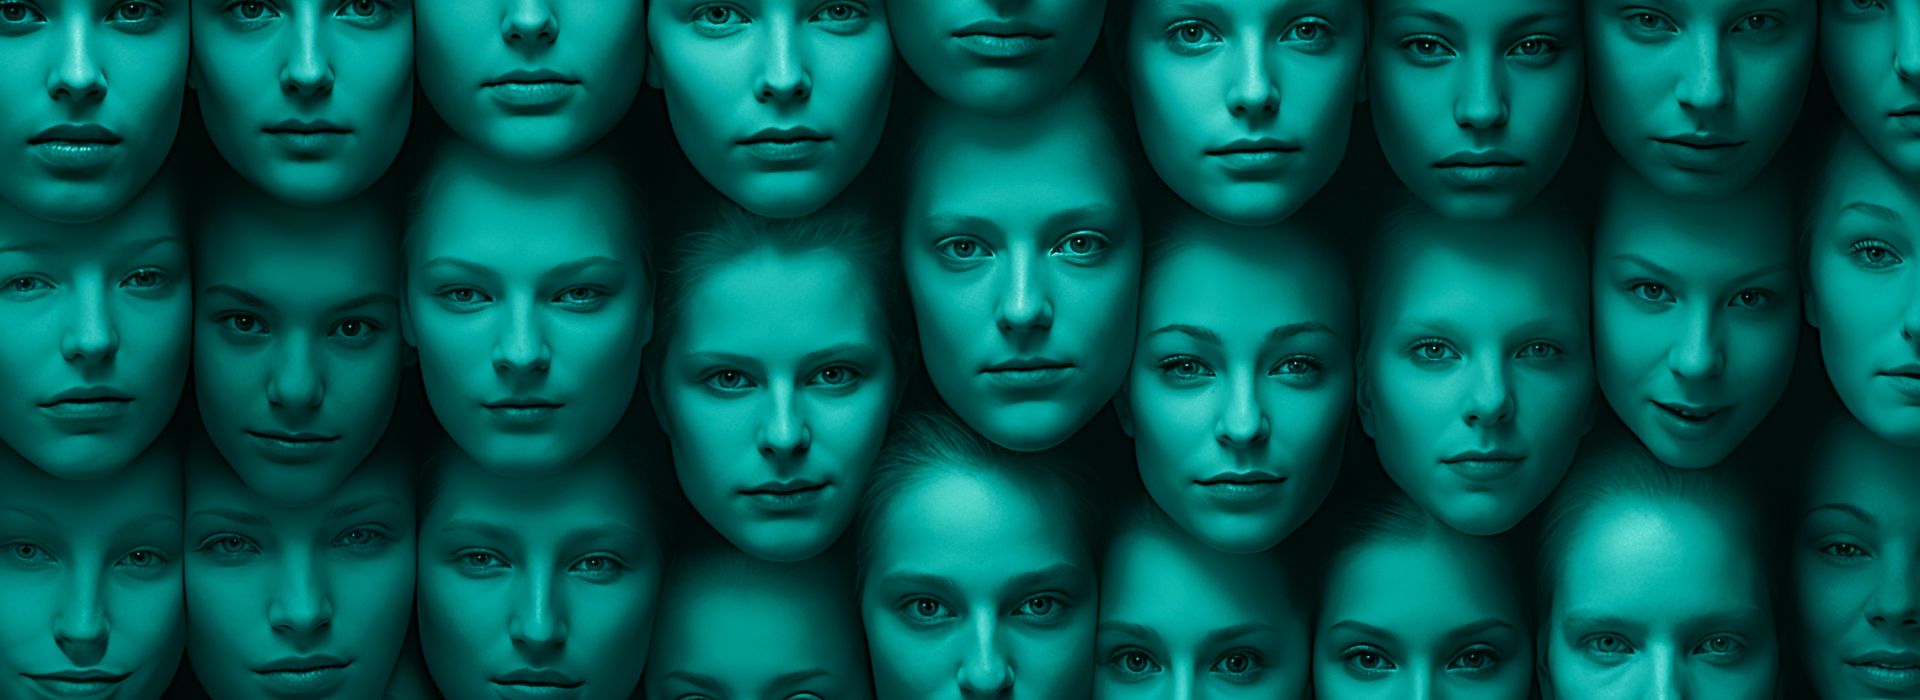 Abstract of women's faces in three vertical rows with various expressions and a green color overlay.